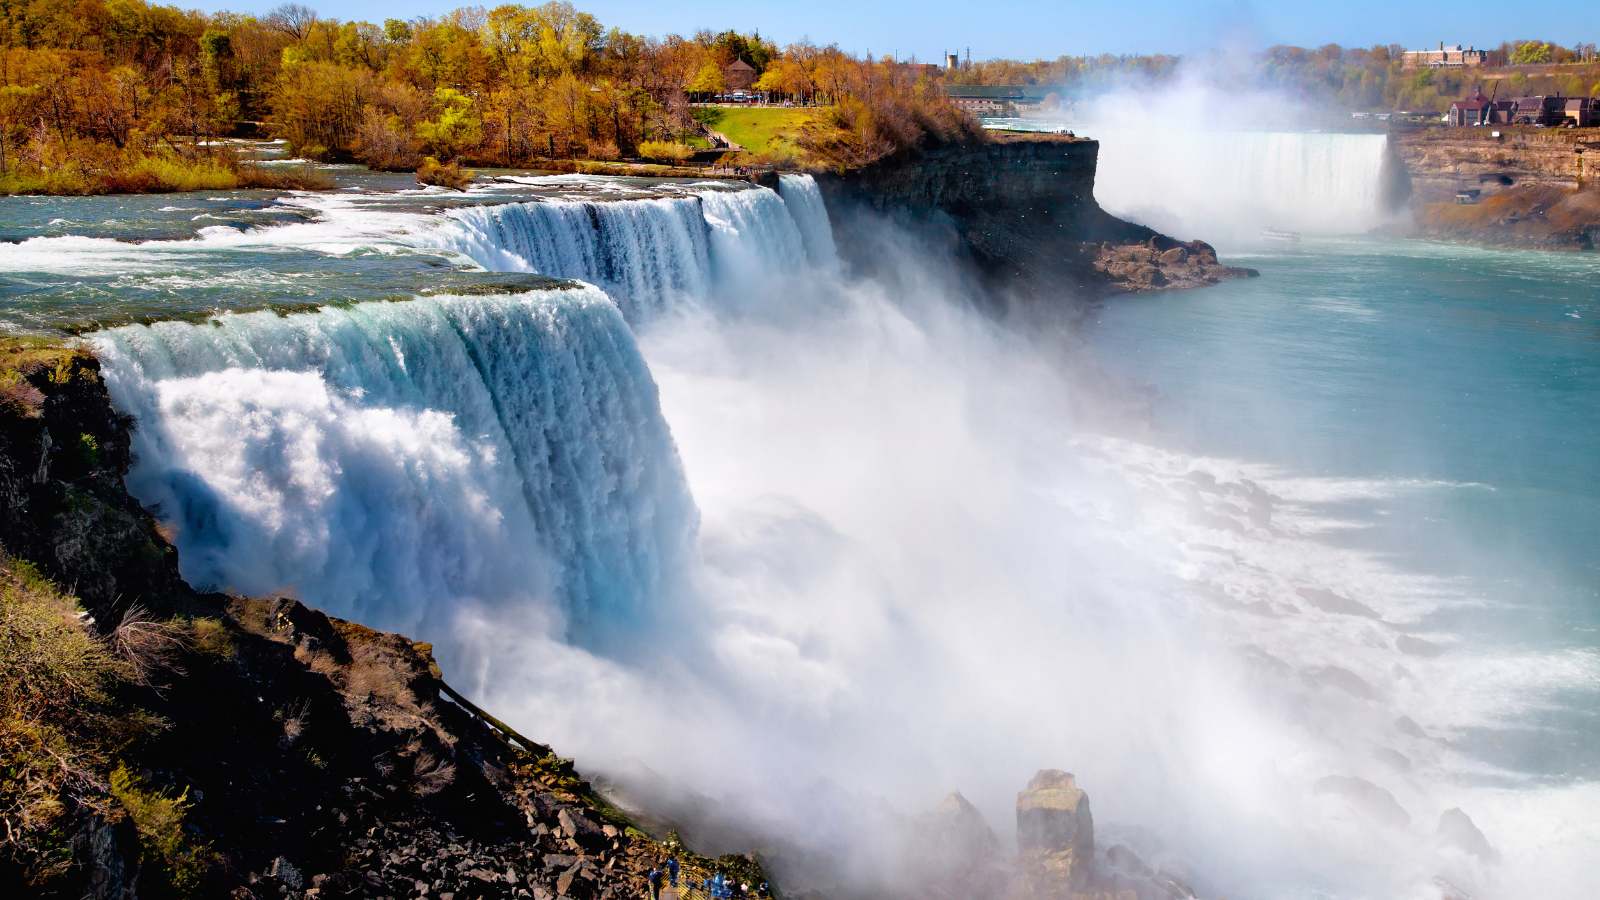 <p>More than eight million visitors explore Niagara Falls annually. Many people think it’s just one big waterfall, but when you get there, you’ll realize that it’s actually three waterfalls: Bridalveil Falls, Horseshoe Falls, and American Falls.</p>